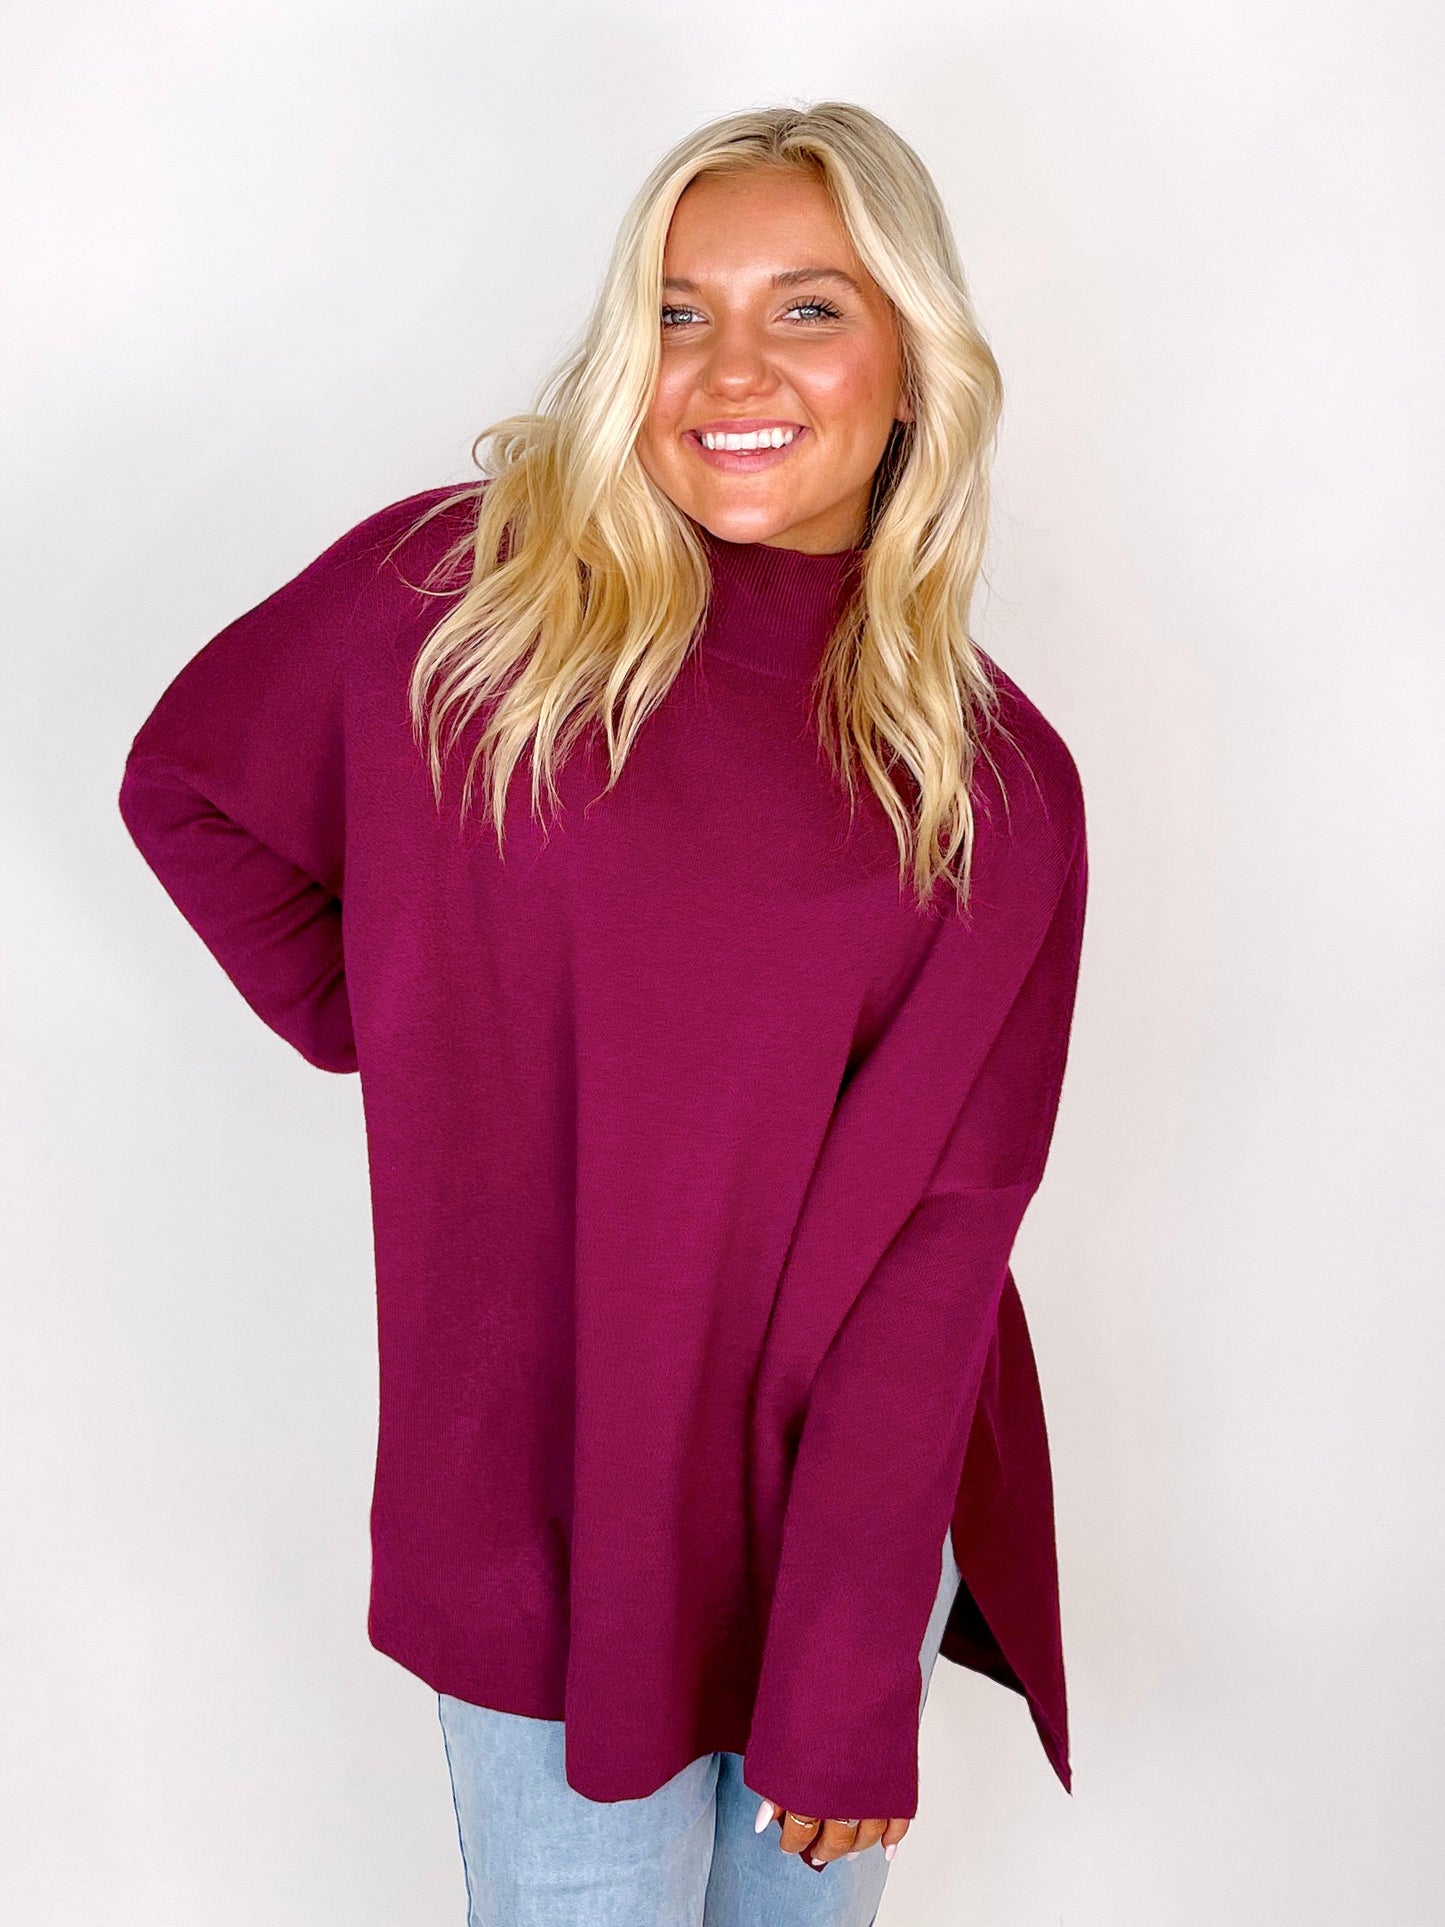 The Quinn Sweater-Sweaters-Entro-The Village Shoppe, Women’s Fashion Boutique, Shop Online and In Store - Located in Muscle Shoals, AL.